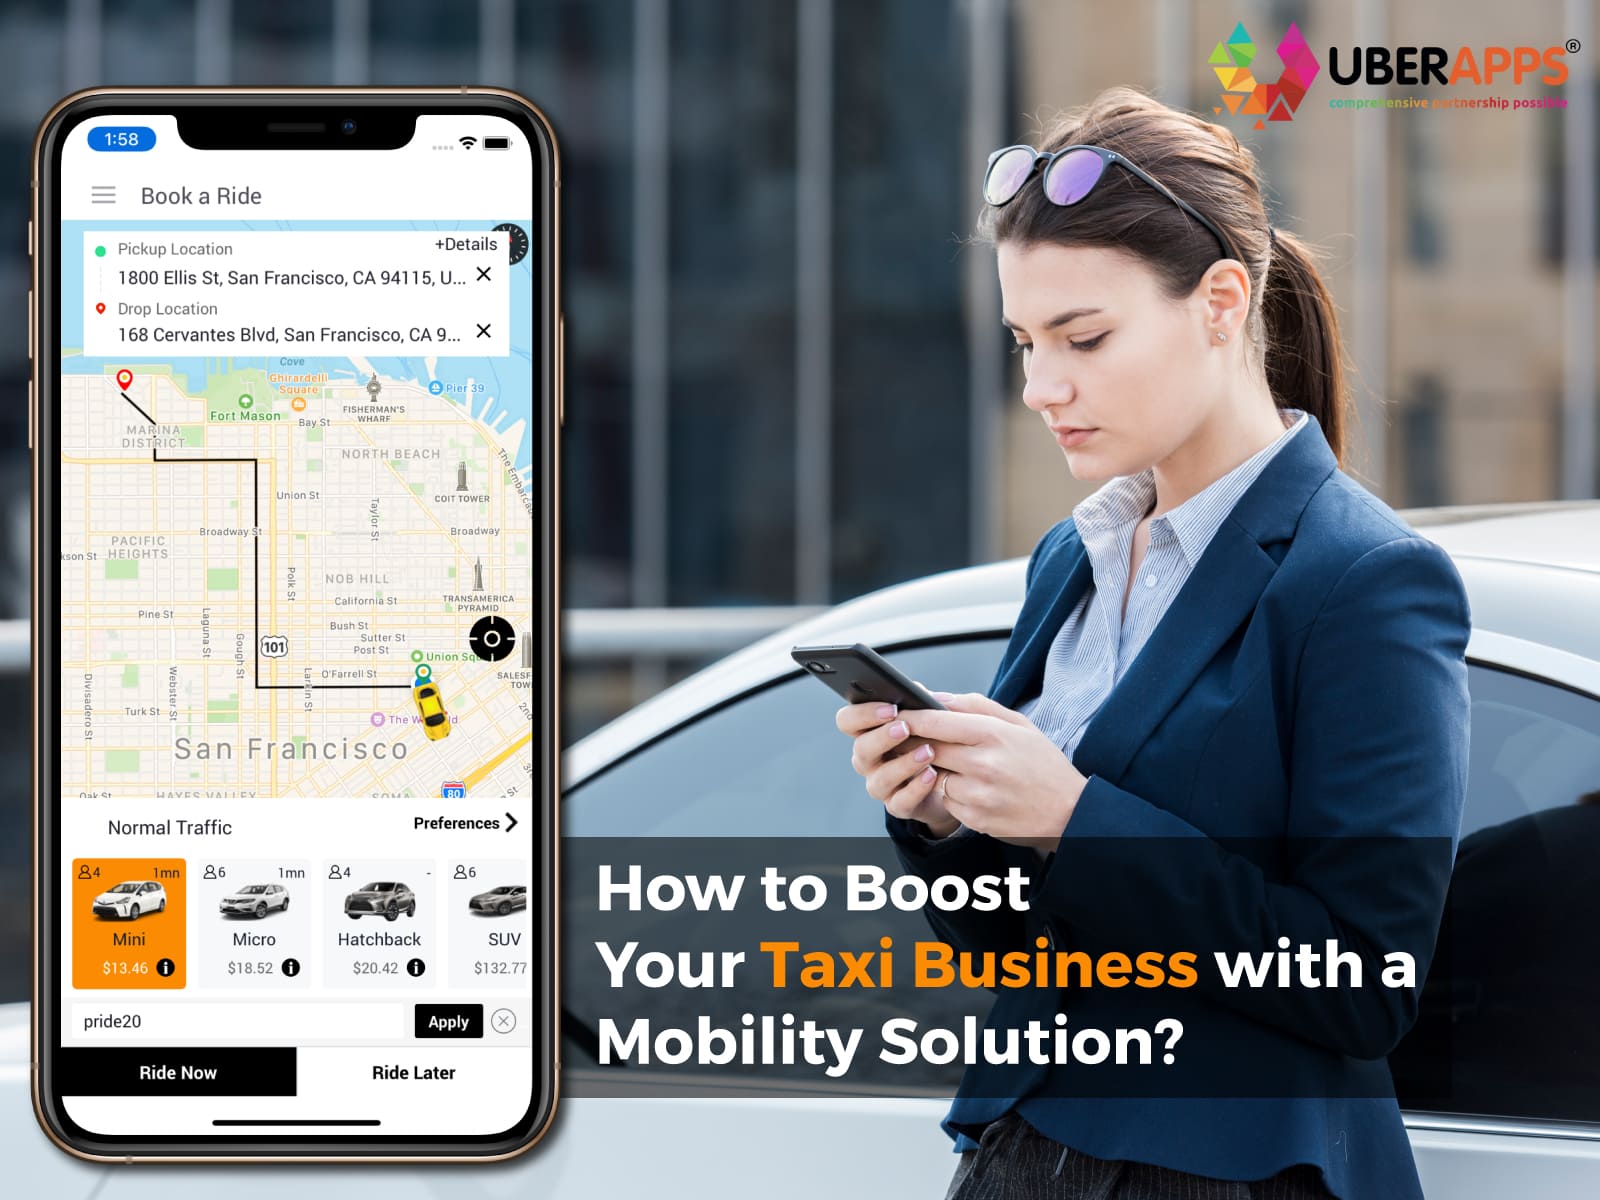 How Can You Boost Your Taxi Business With A Mobility Solution?